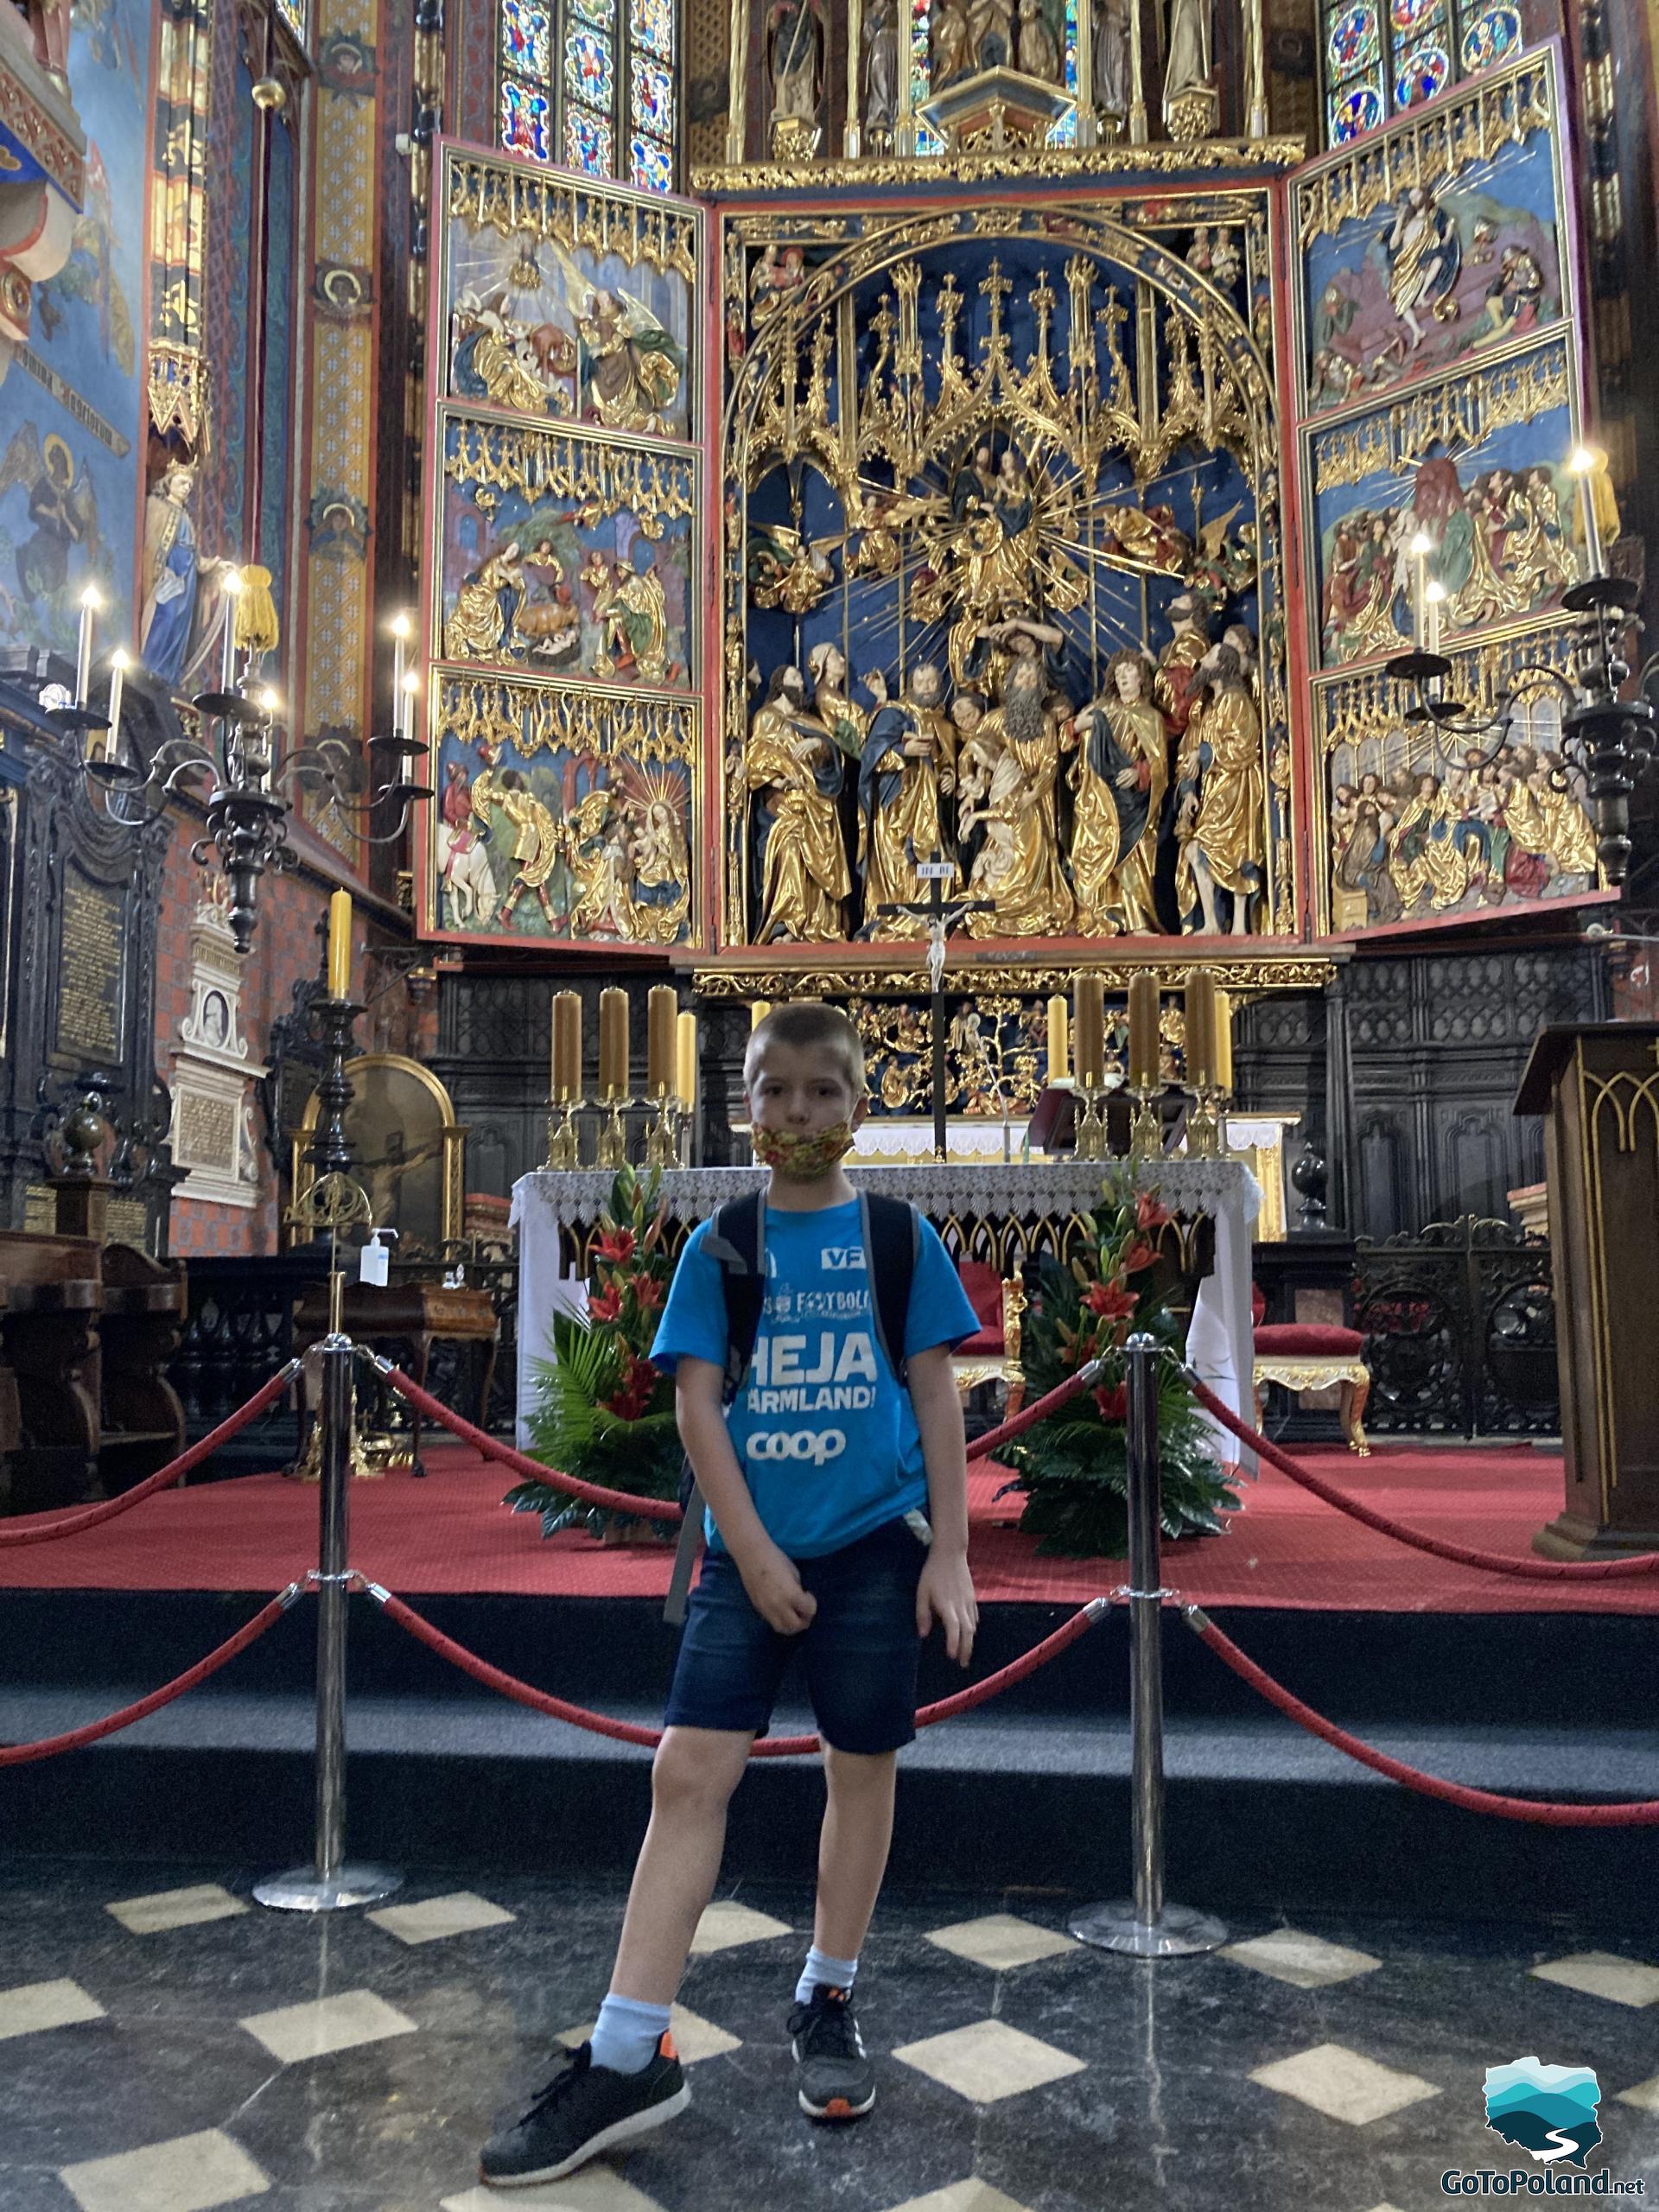 a boy is standing in front of the golden altar